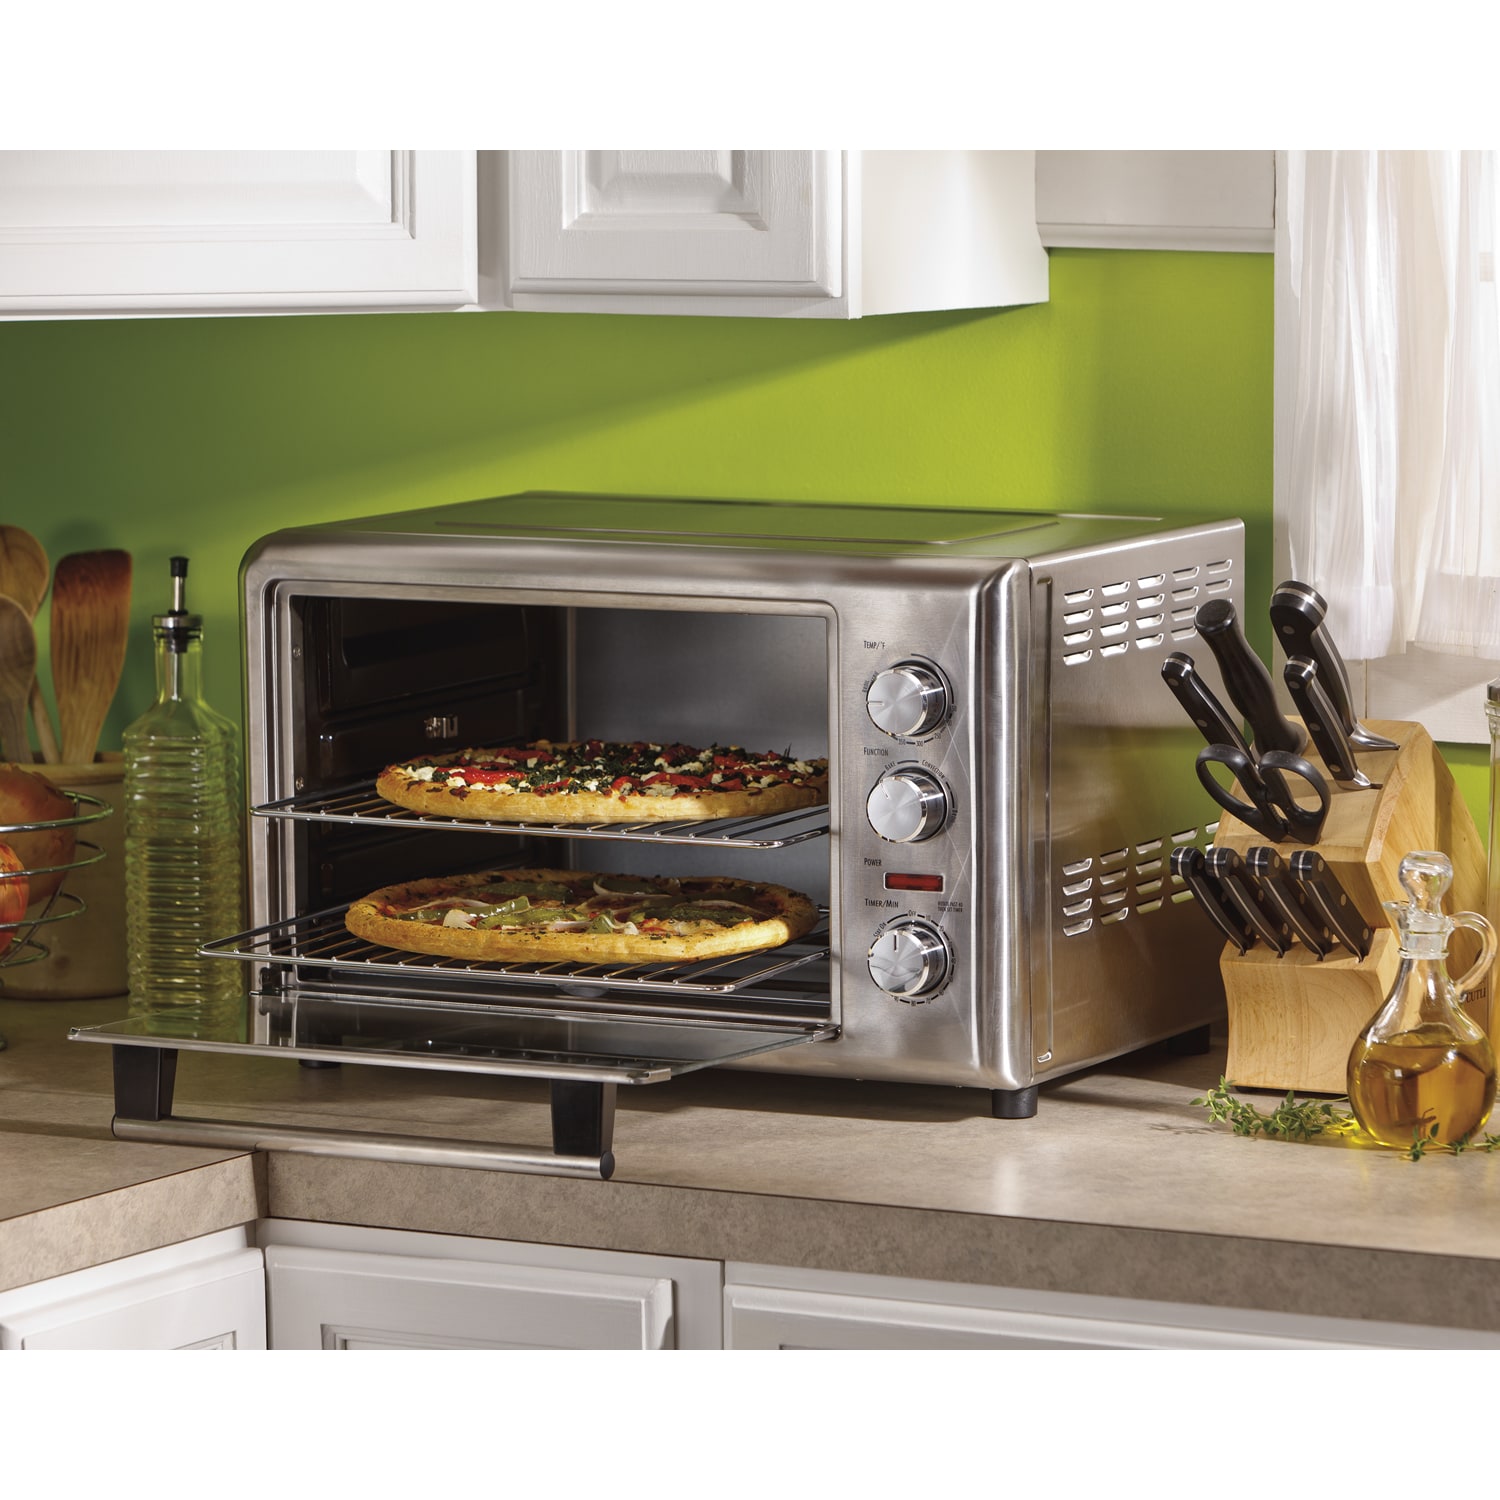 https://ak1.ostkcdn.com/images/products/9542969/Hamilton-Beach-Stainless-Countertop-Oven-with-Convection-and-Rotisserie-11fd8112-d3d9-4b21-8a8b-efffc4973a45.jpg